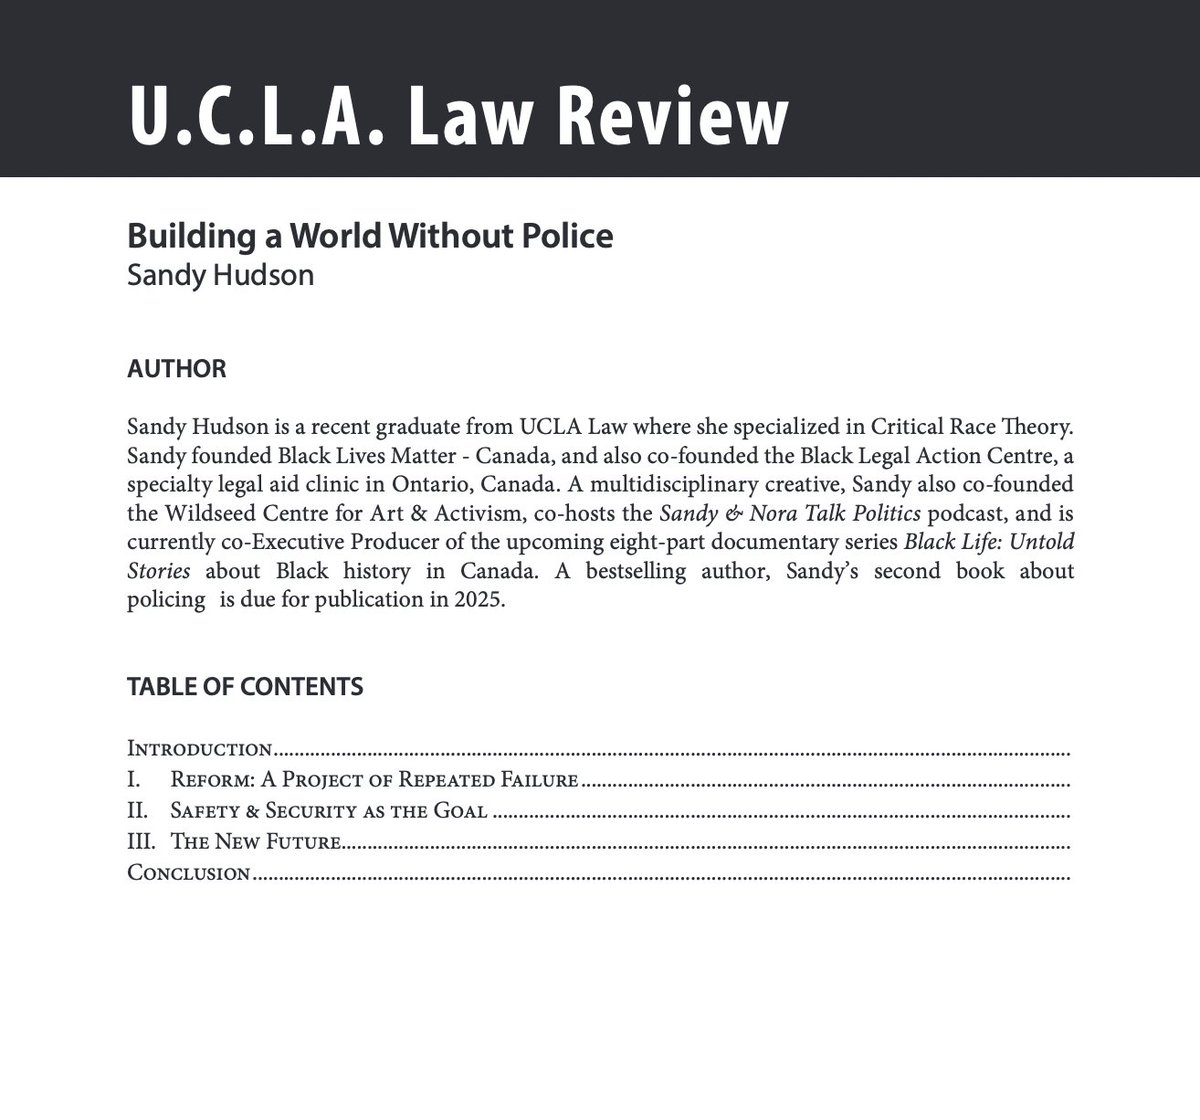 Some scholarship for the times: uclalawreview.org/building-a-wor…